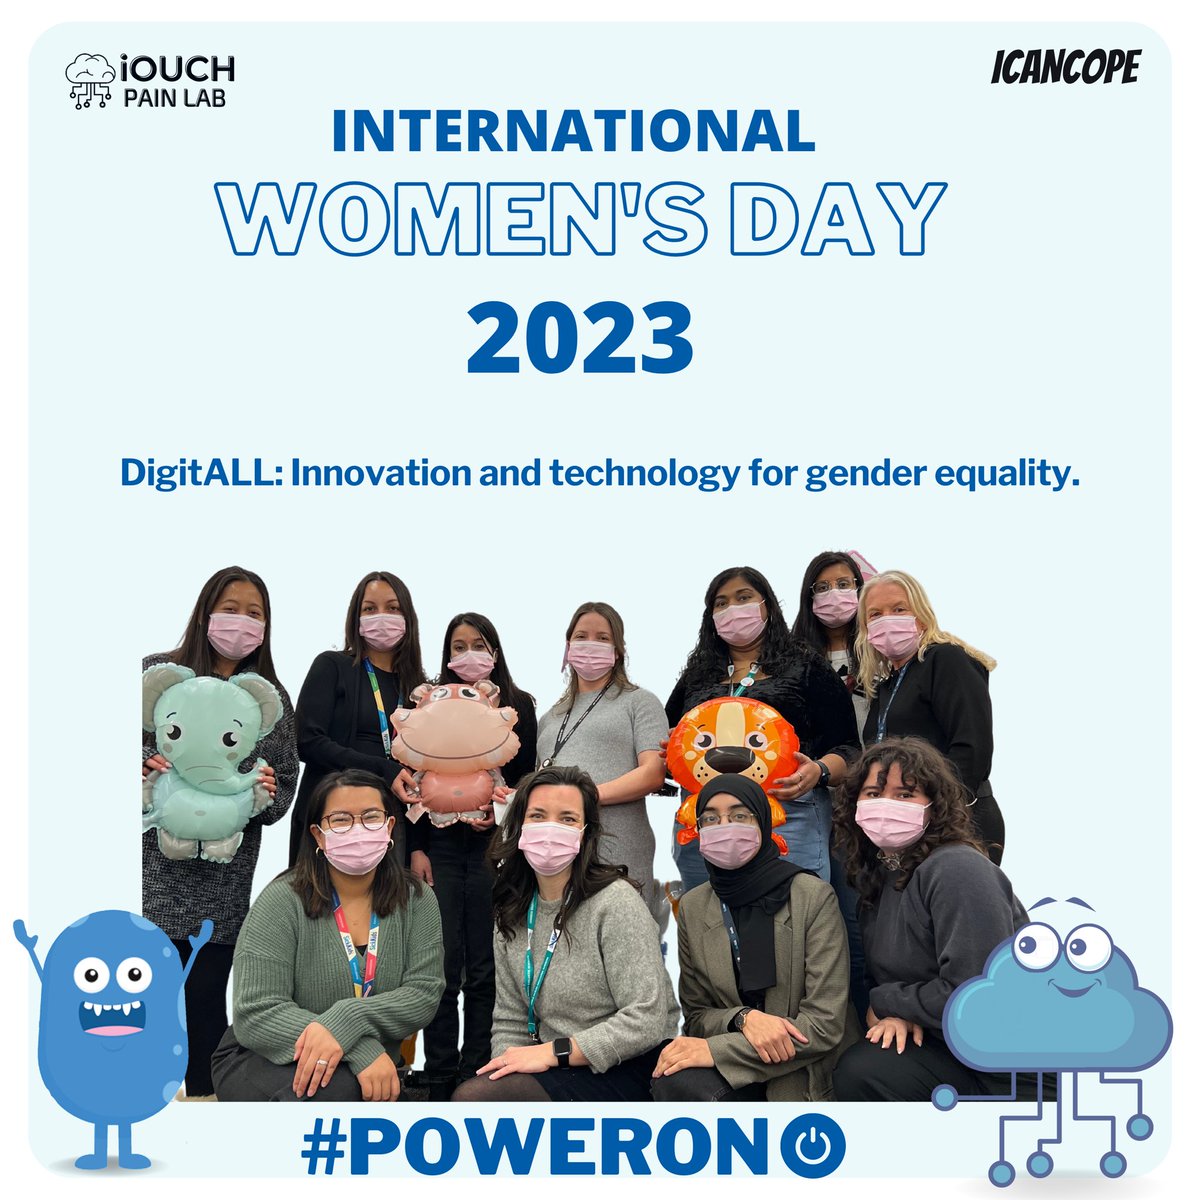 Happy #InternationalWomensDay from @DrJenStinson and the iOuch Pain Lab! This year’s theme is DigitALL: Innovation and technology for gender equality. 

We are calling to #PowerOn efforts to make the digital world safer, more inclusive, and more equitable!